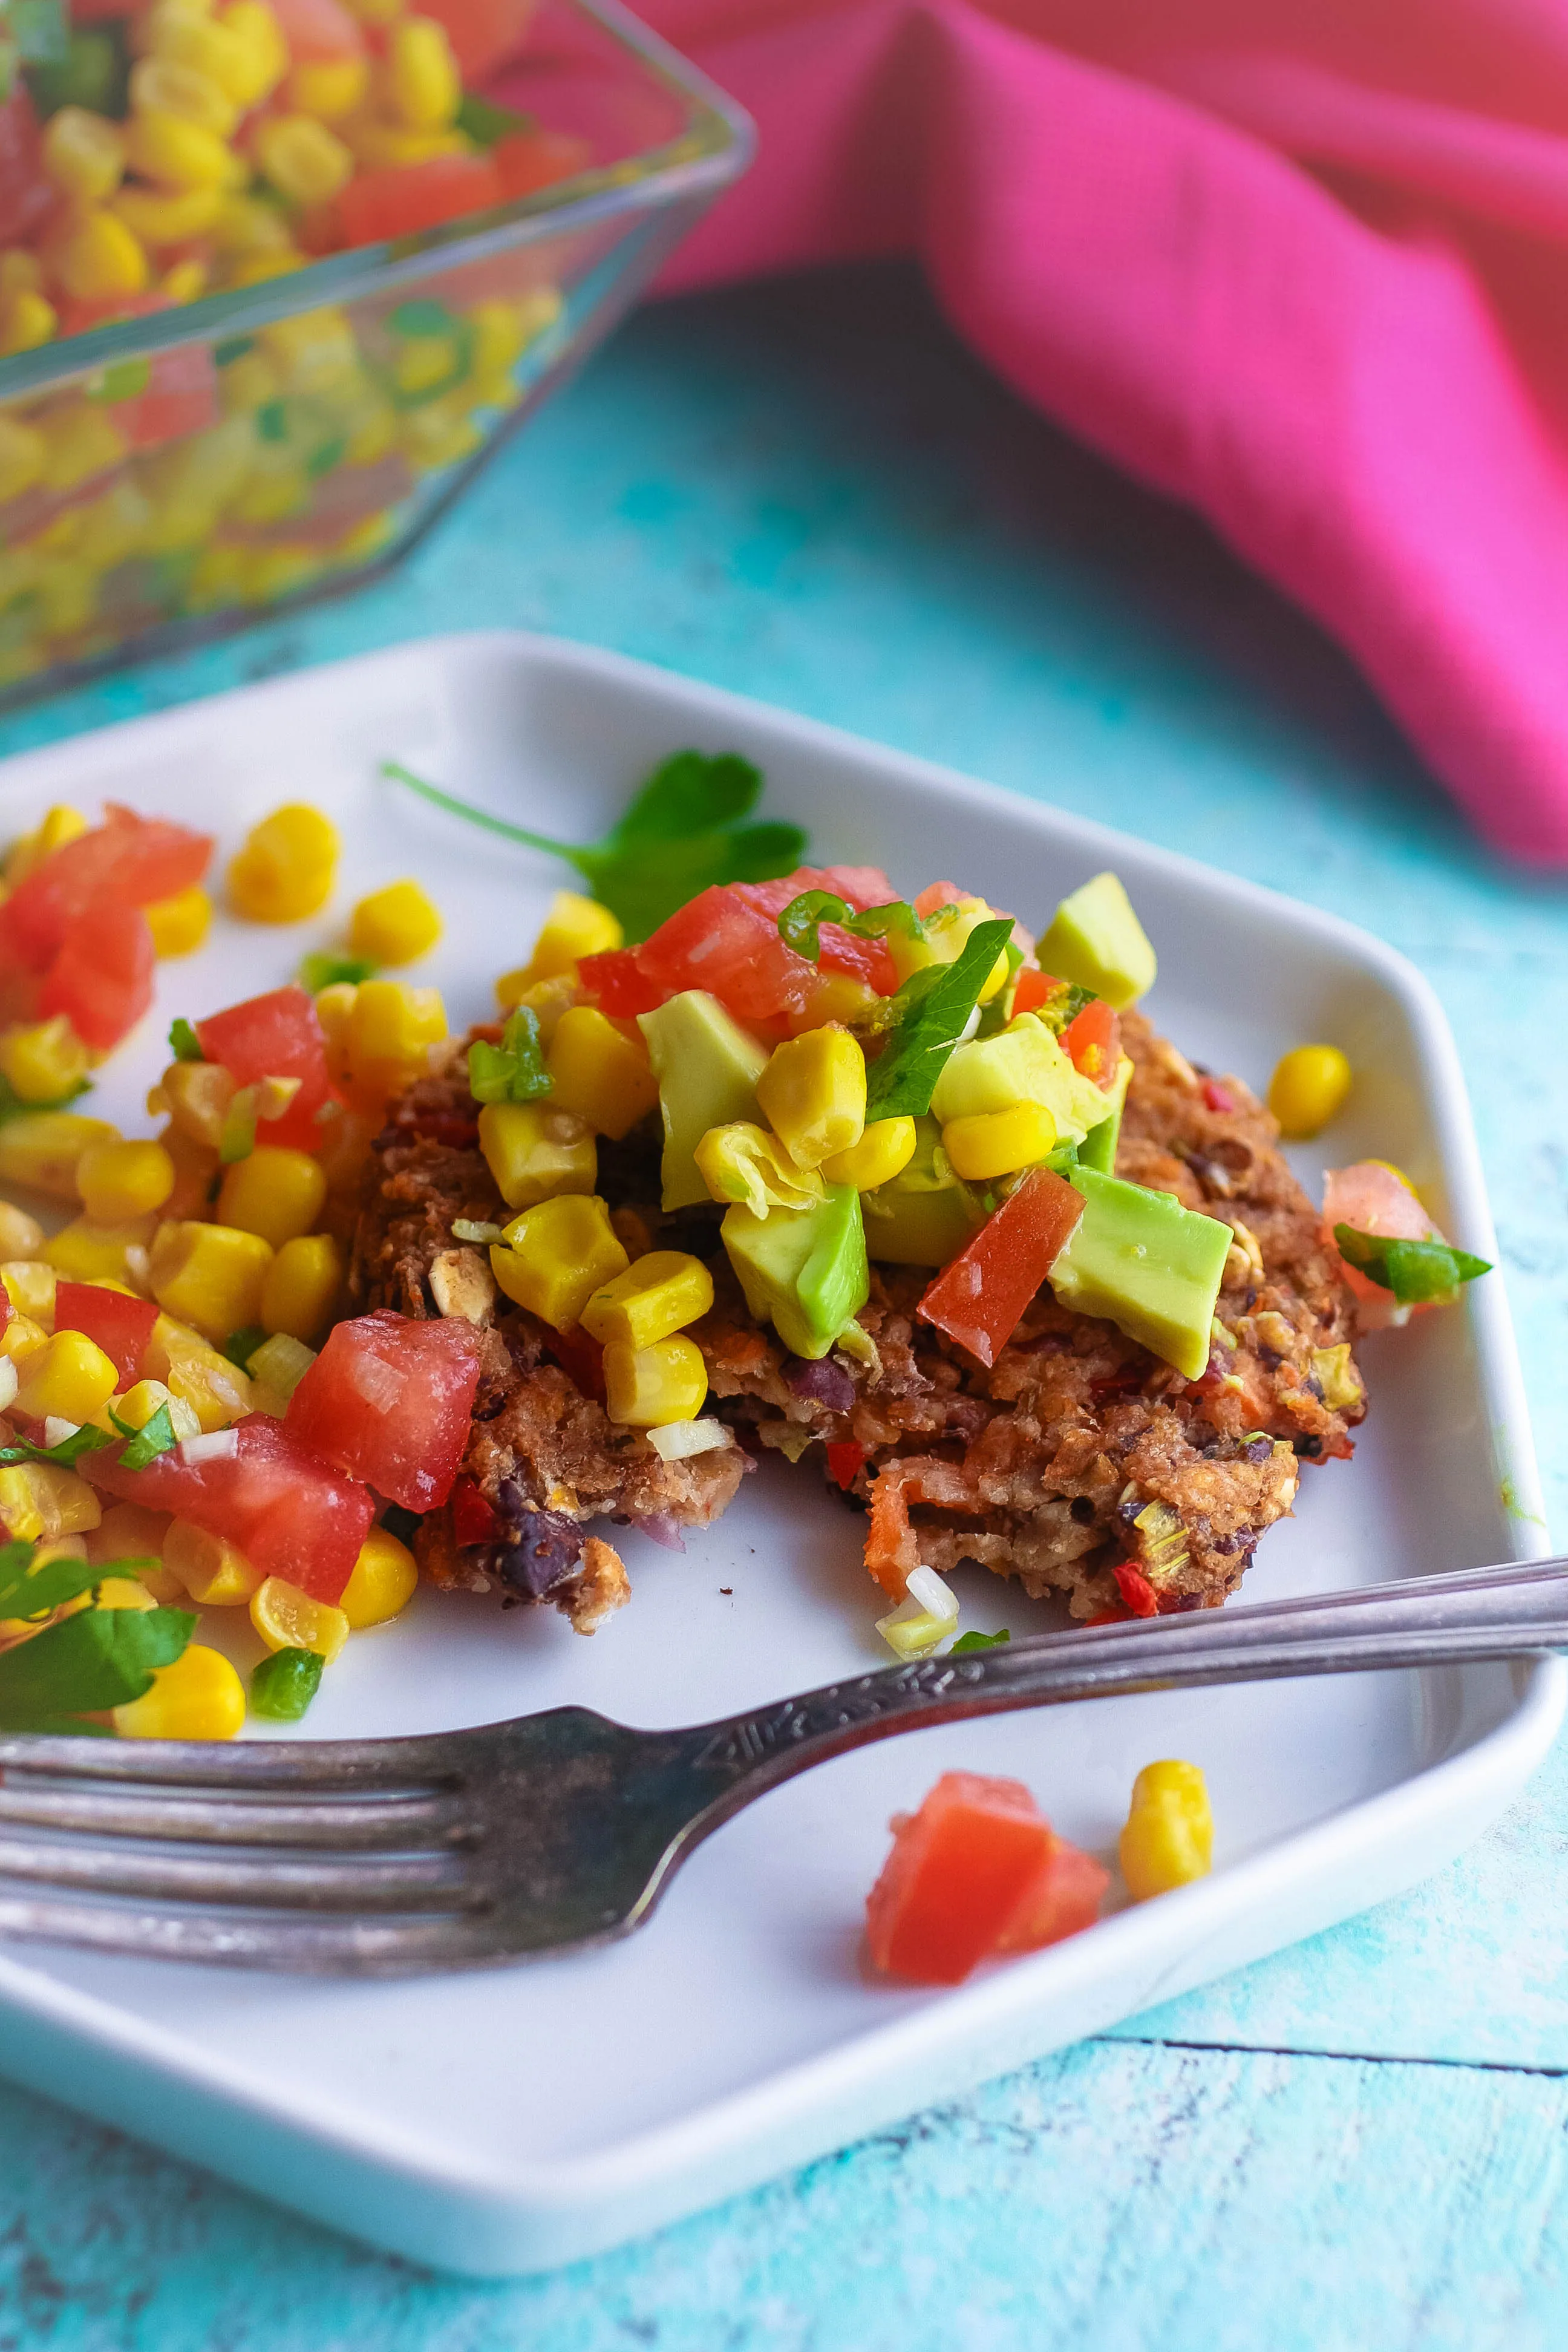 Black Bean Veggie Burgers with Corn Salsa don't include eggs or dairy, and make a perfect meatless meal! You'll love the flavors in these Black Bean Veggie Burgers with Corn Salsa!